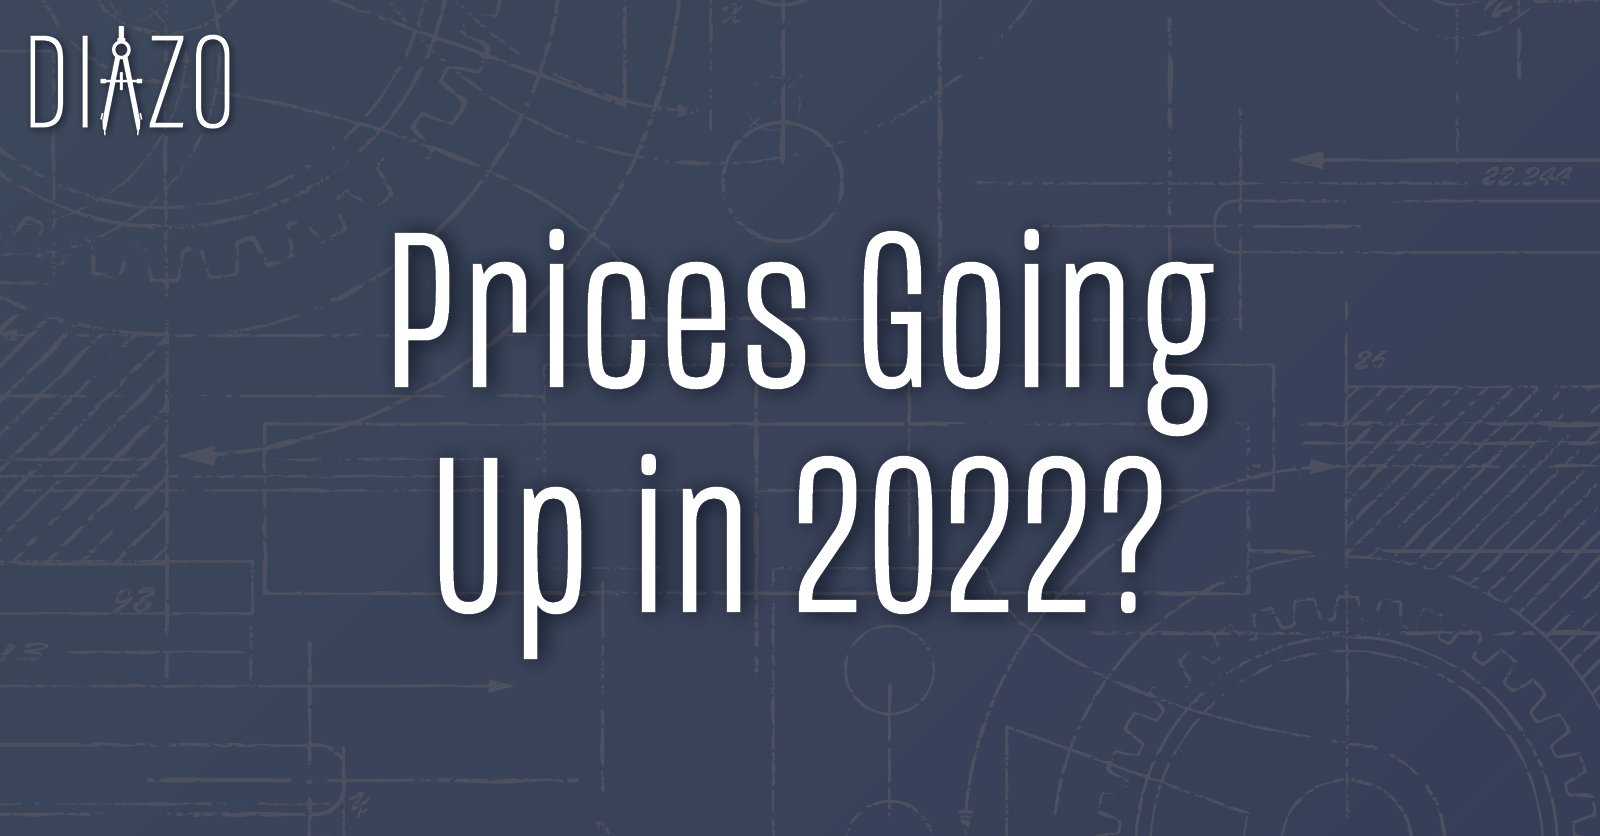 Prices Going Up in 2022?